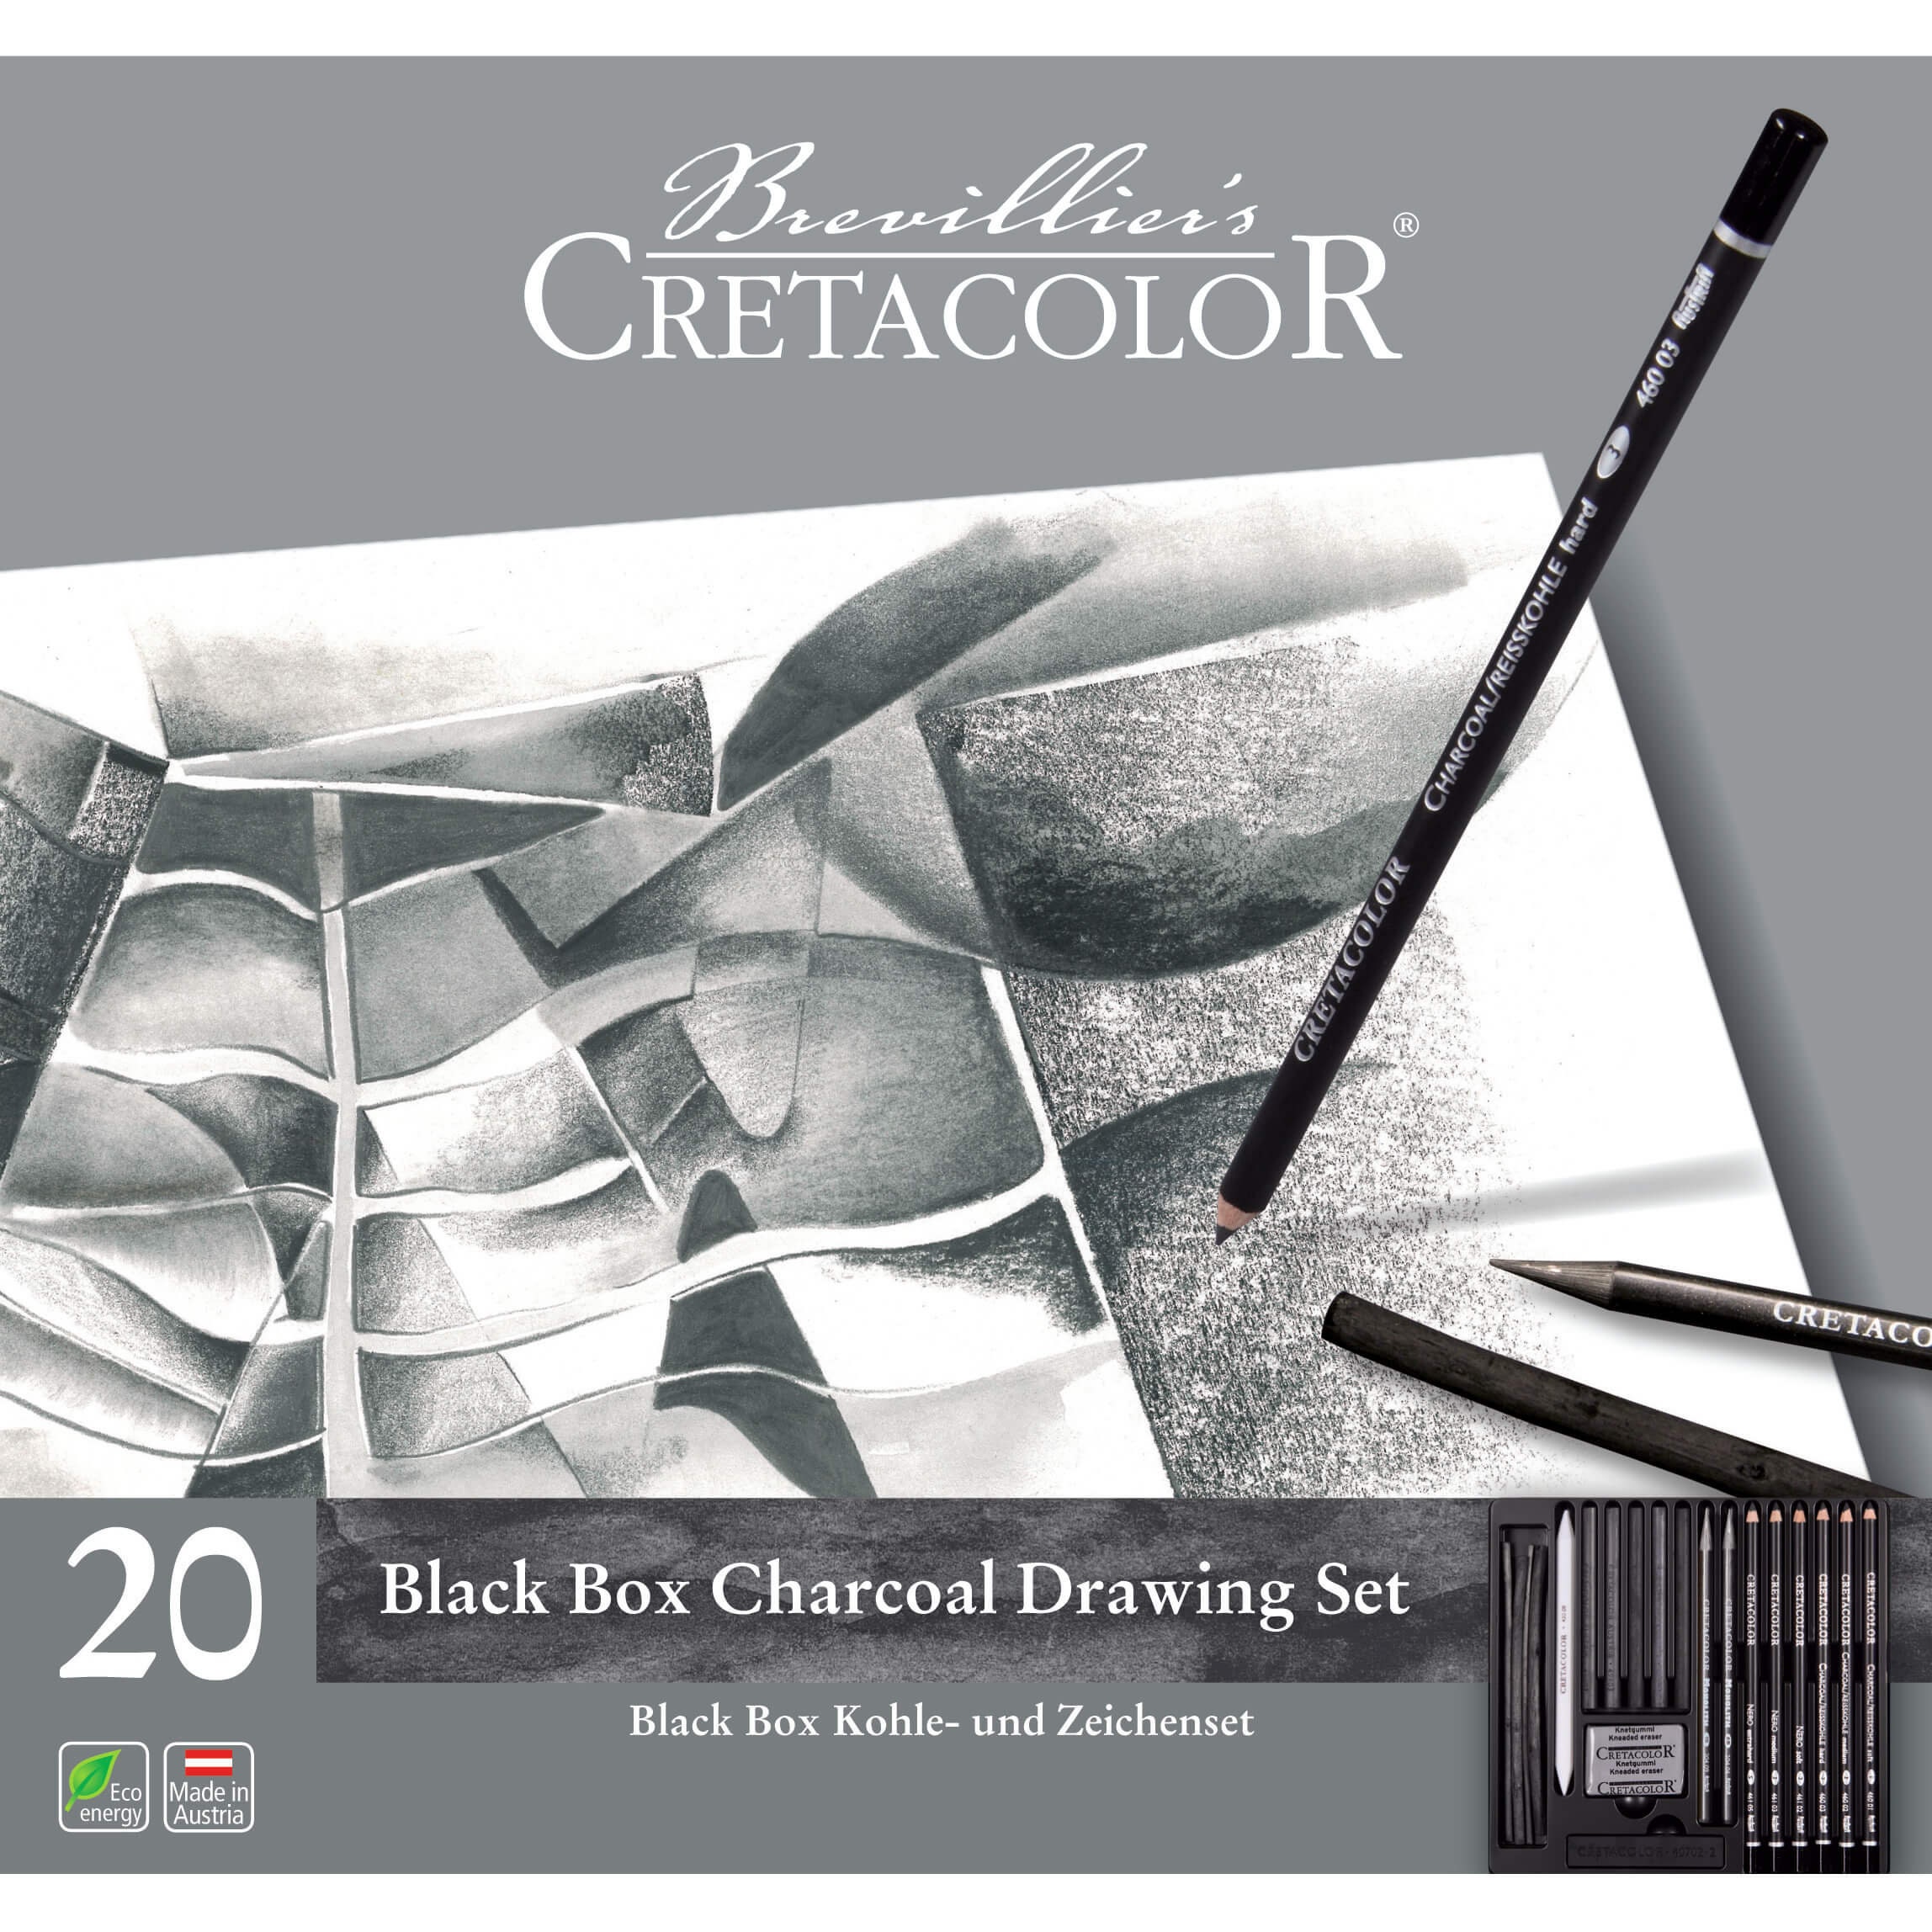 54-Piece Drawing & Sketching Art Set with 4 Sketch Pads - Graphite,  Charcoal Pencils & Sticks, 54-Piece Drawing Set - Pay Less Super Markets